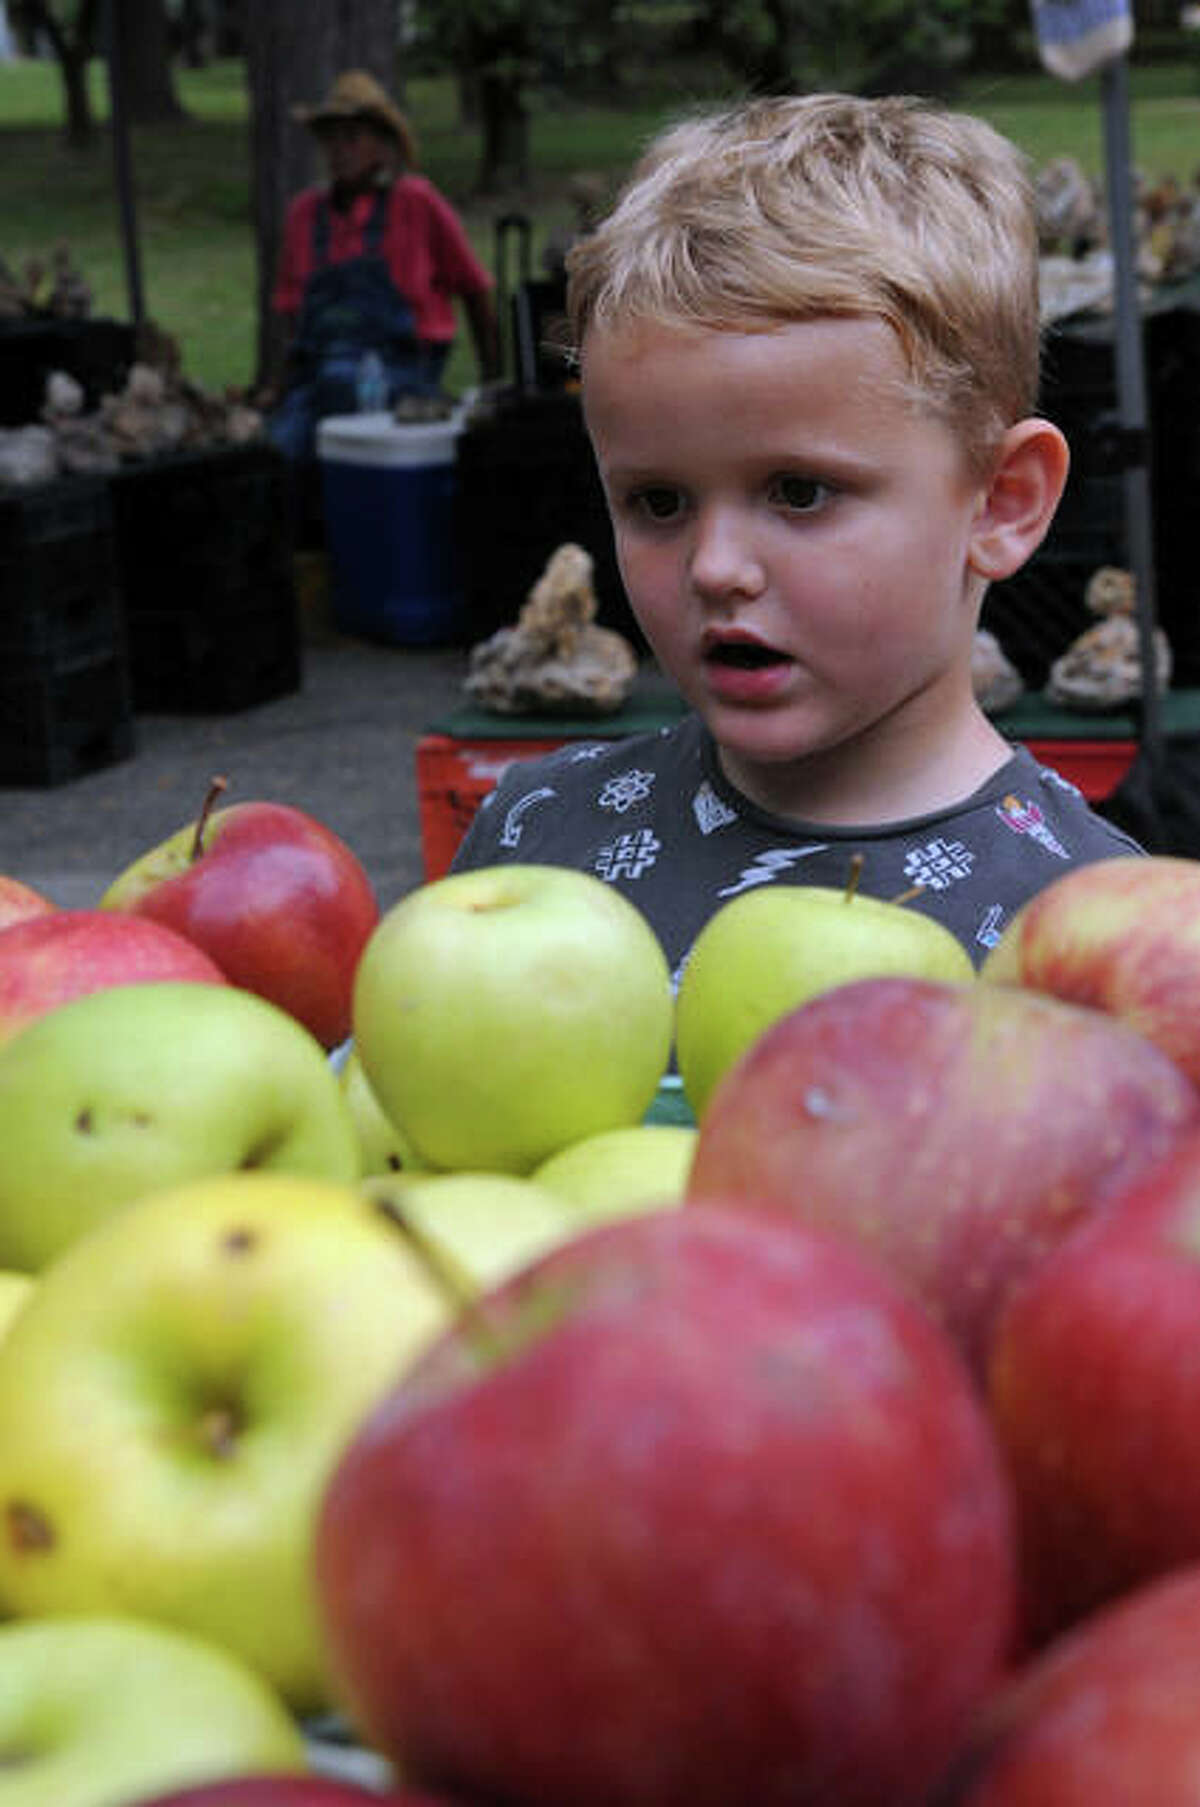 Abram Ballard of Wood River gazes at a large selection of fresh apples during the 2019 Apple Festival at Pere Marquette Lodge. This year’s fest is set for Sunday at the lodge from 11 a.m. to 3 p.m.